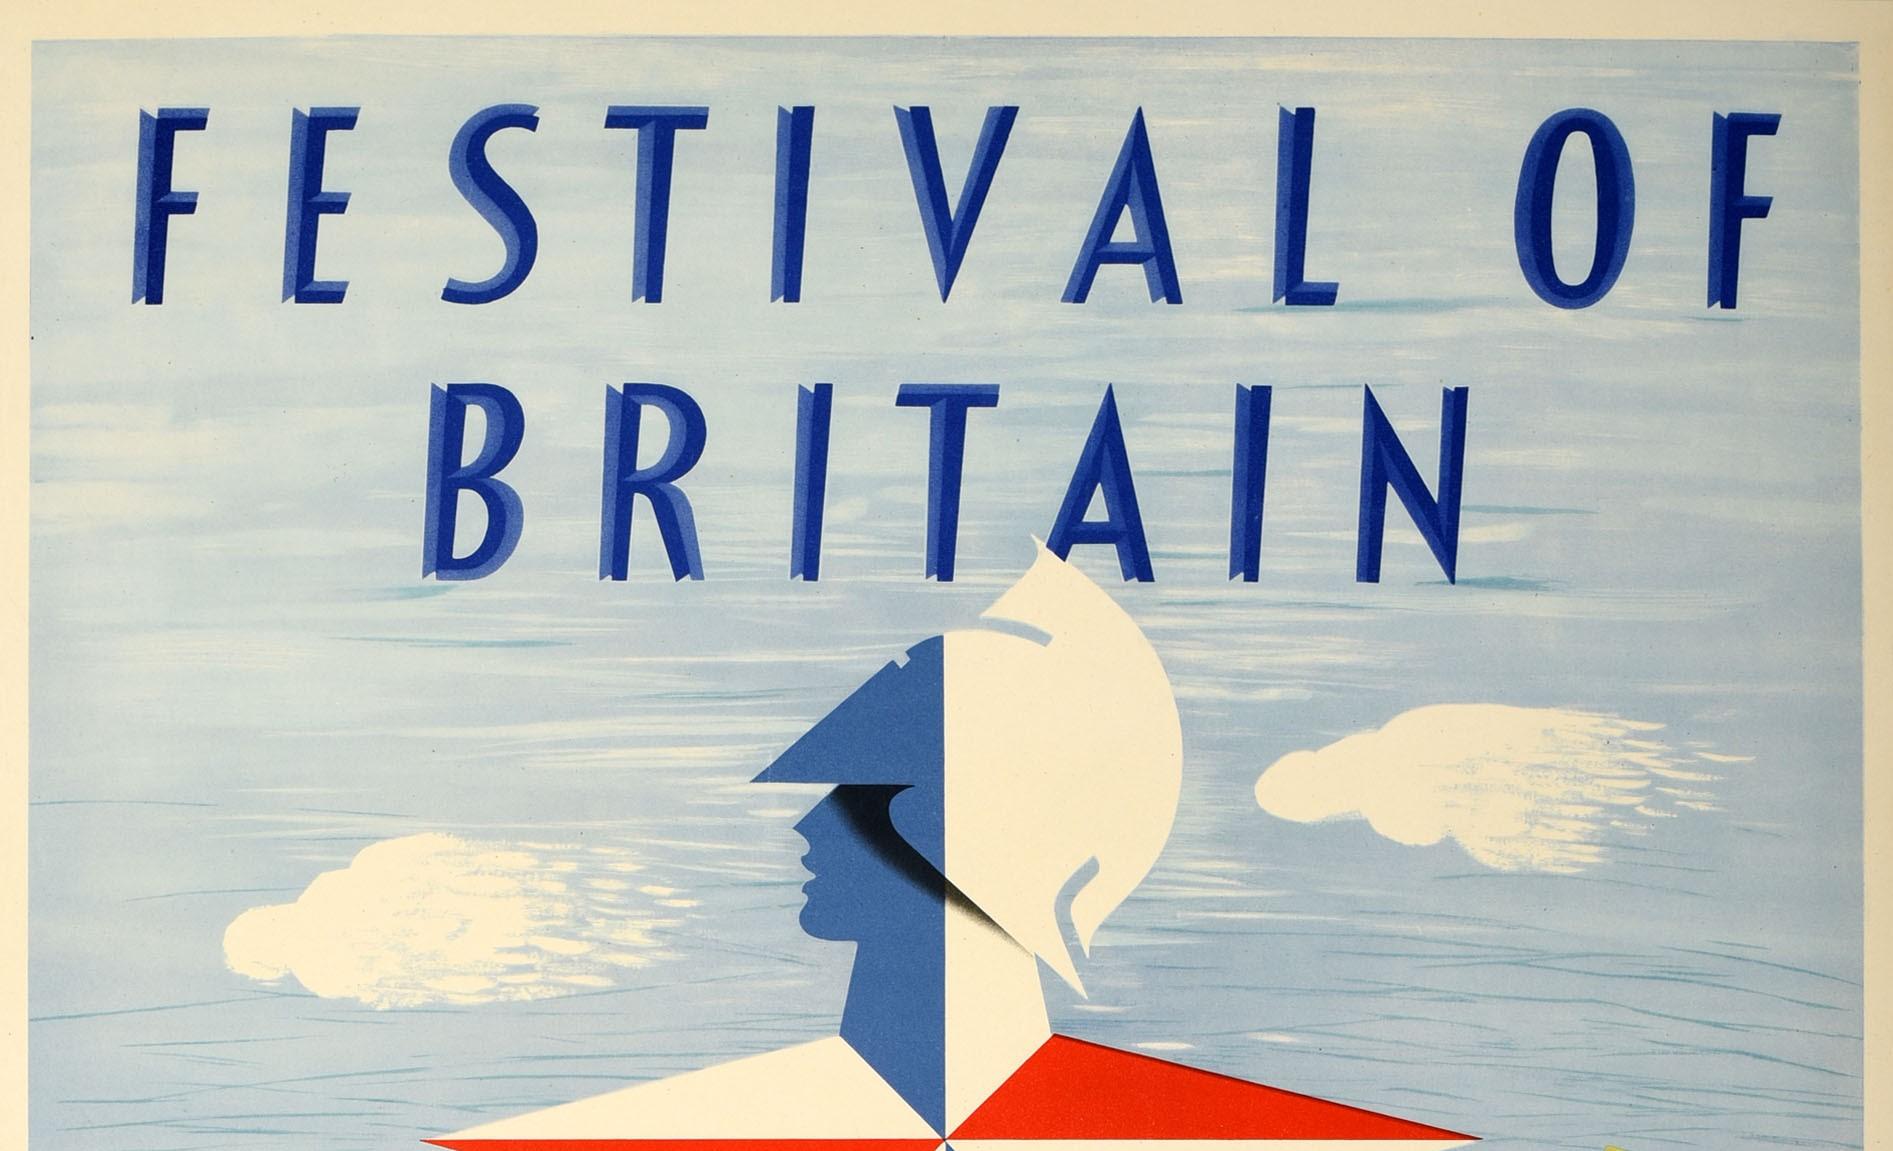 Original Vintage Mid Century Design Poster By A. Games Festival Of Britain 1951 - Print by Abram Games